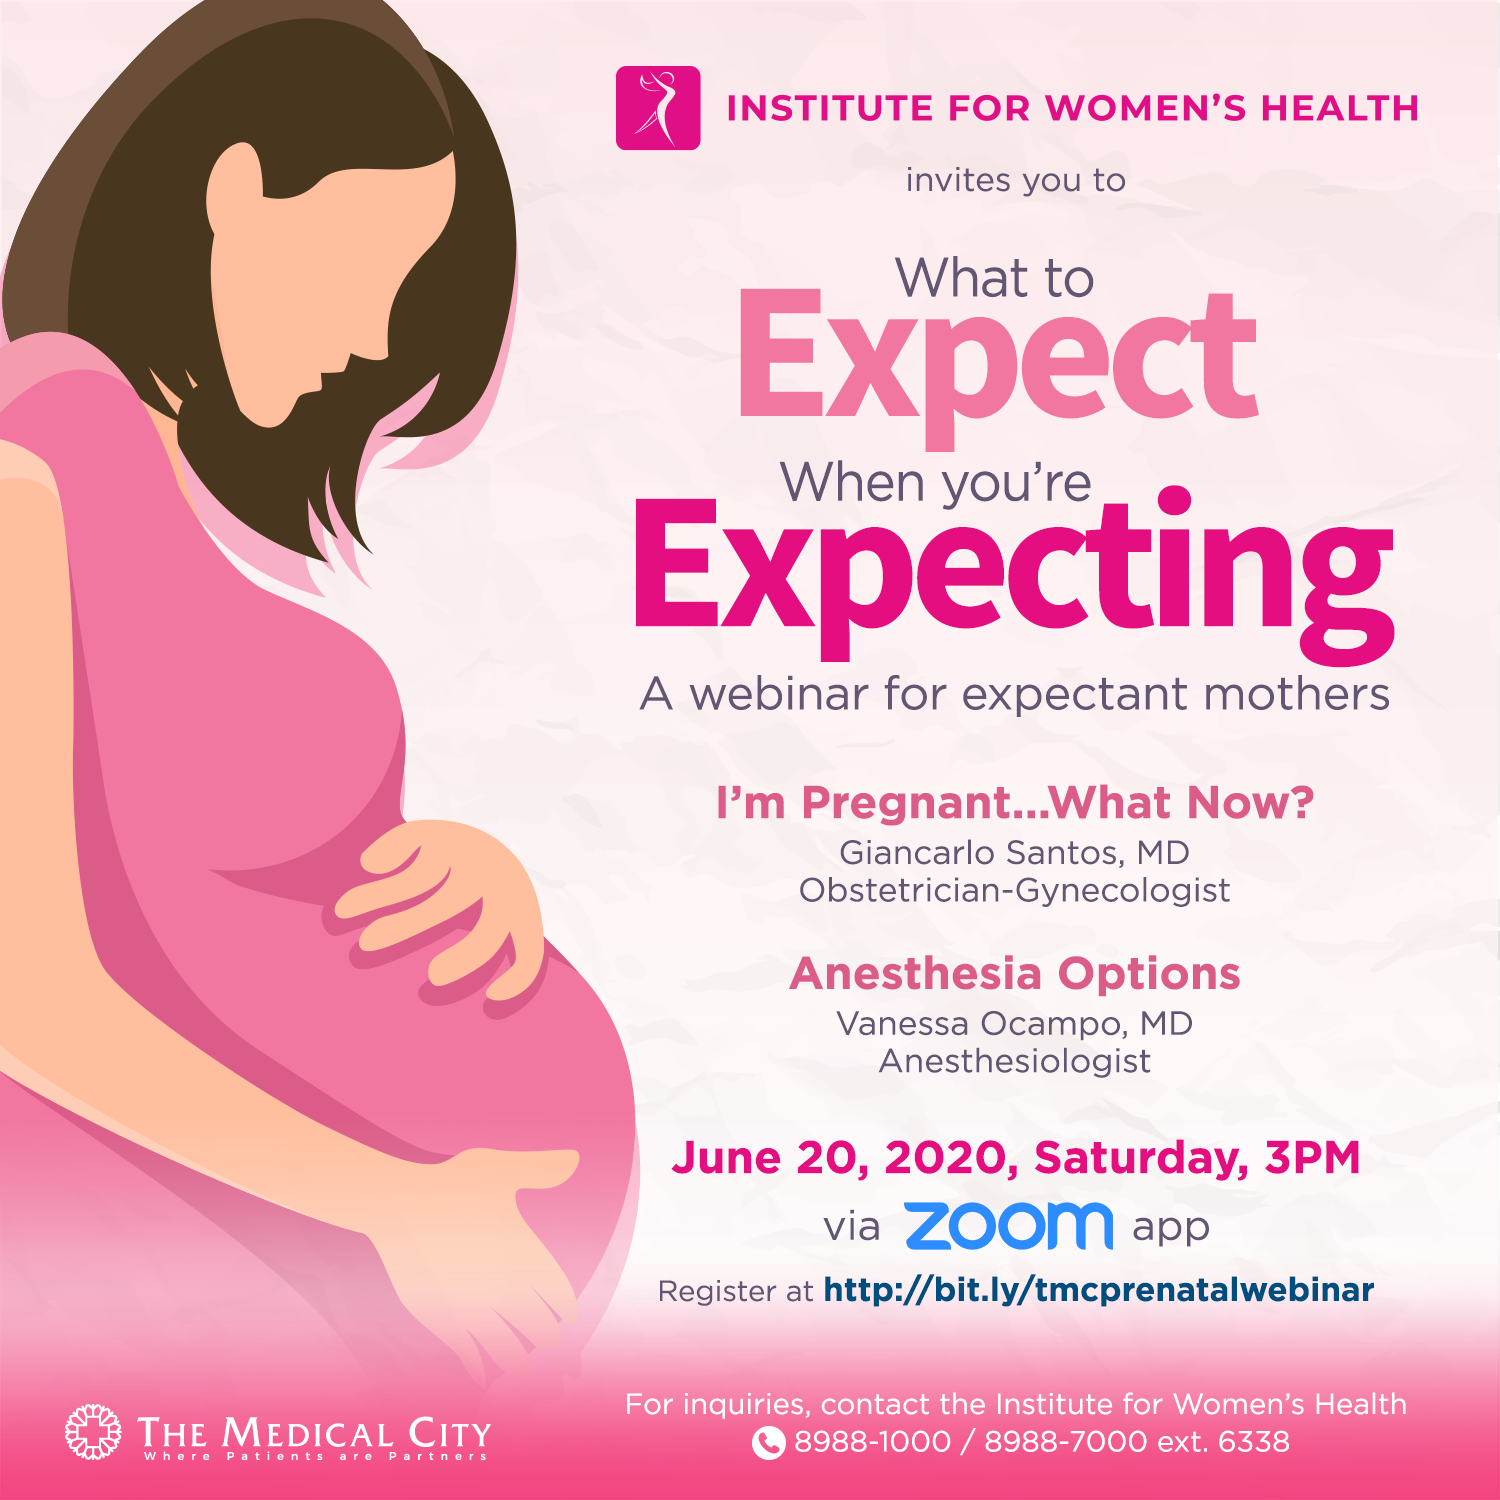 tmc institute for womens health webinar for expecting mothers schedule and speaker info